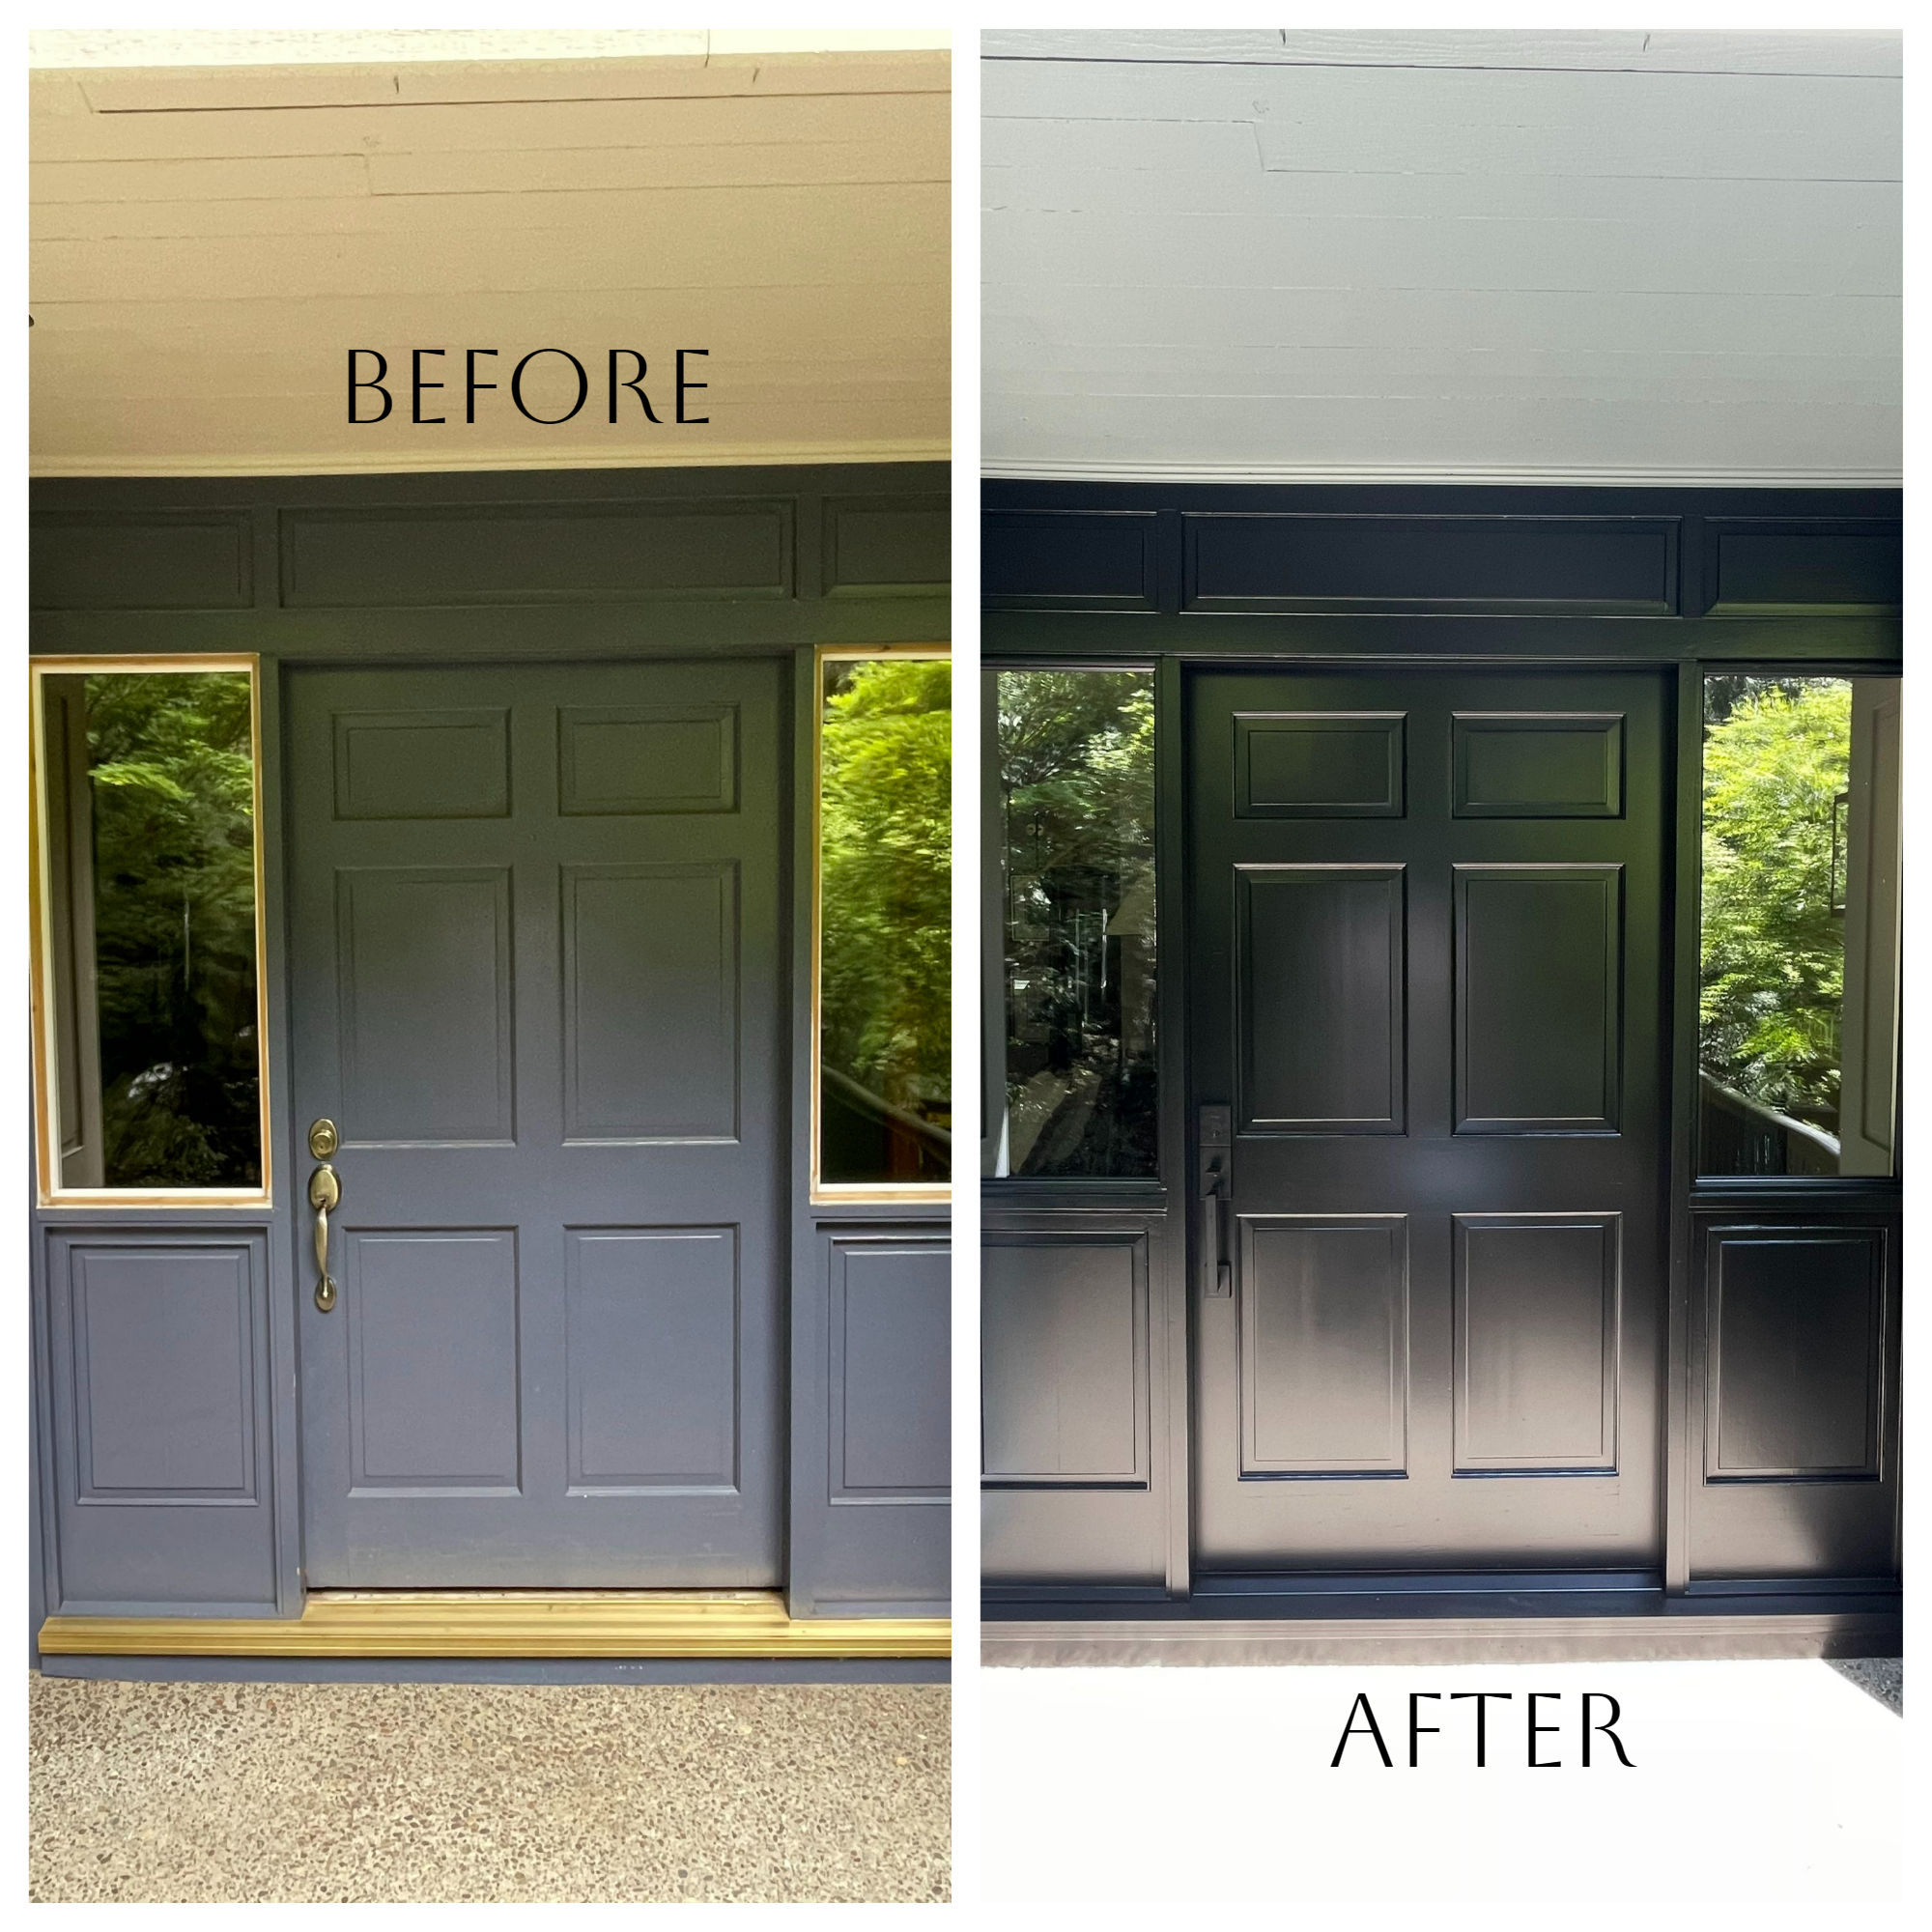 Before and after pictures of a front door transformed with a fresh exterior paint in summer 2023.